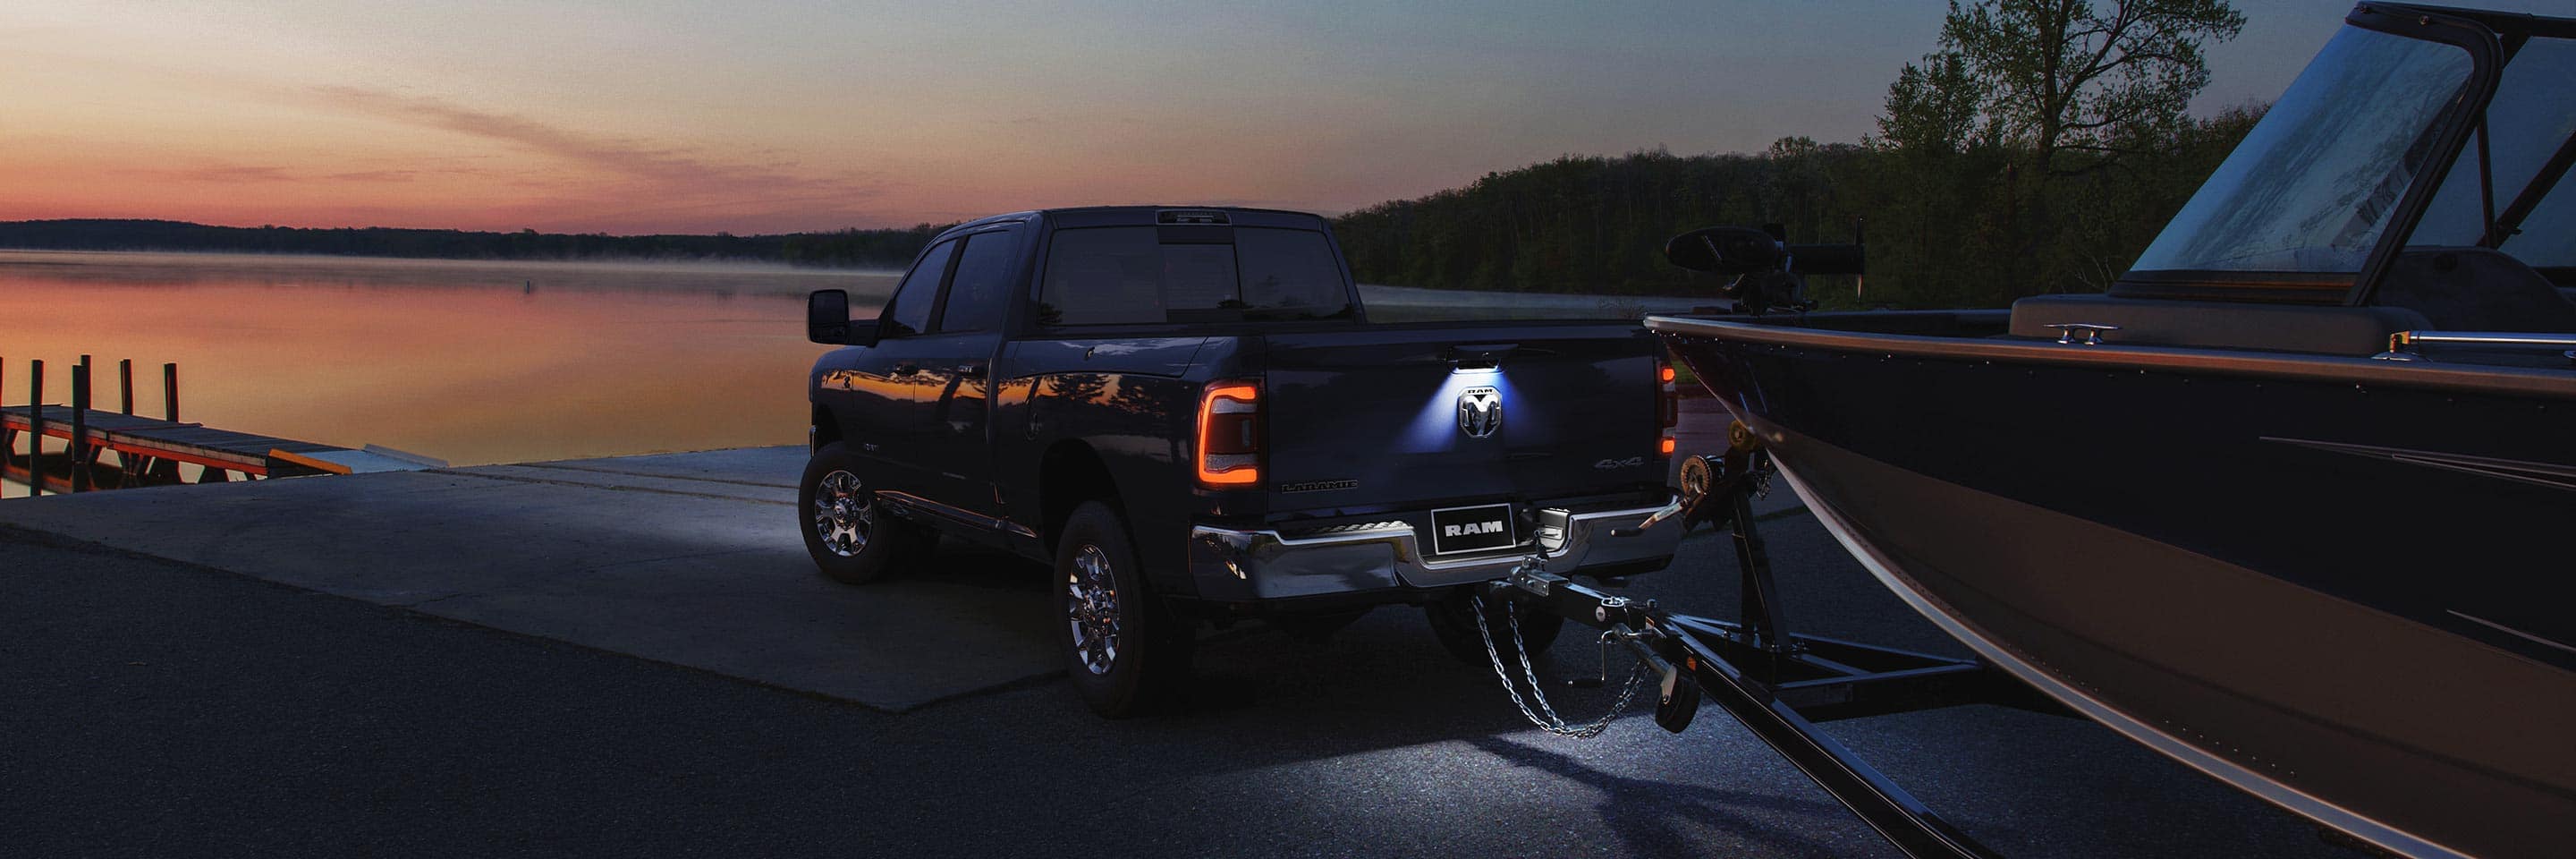 The rear view of a 2023 Ram 2500 Laramie with its taillamps lit, towing a large speed boat on a boat ramp at dusk.